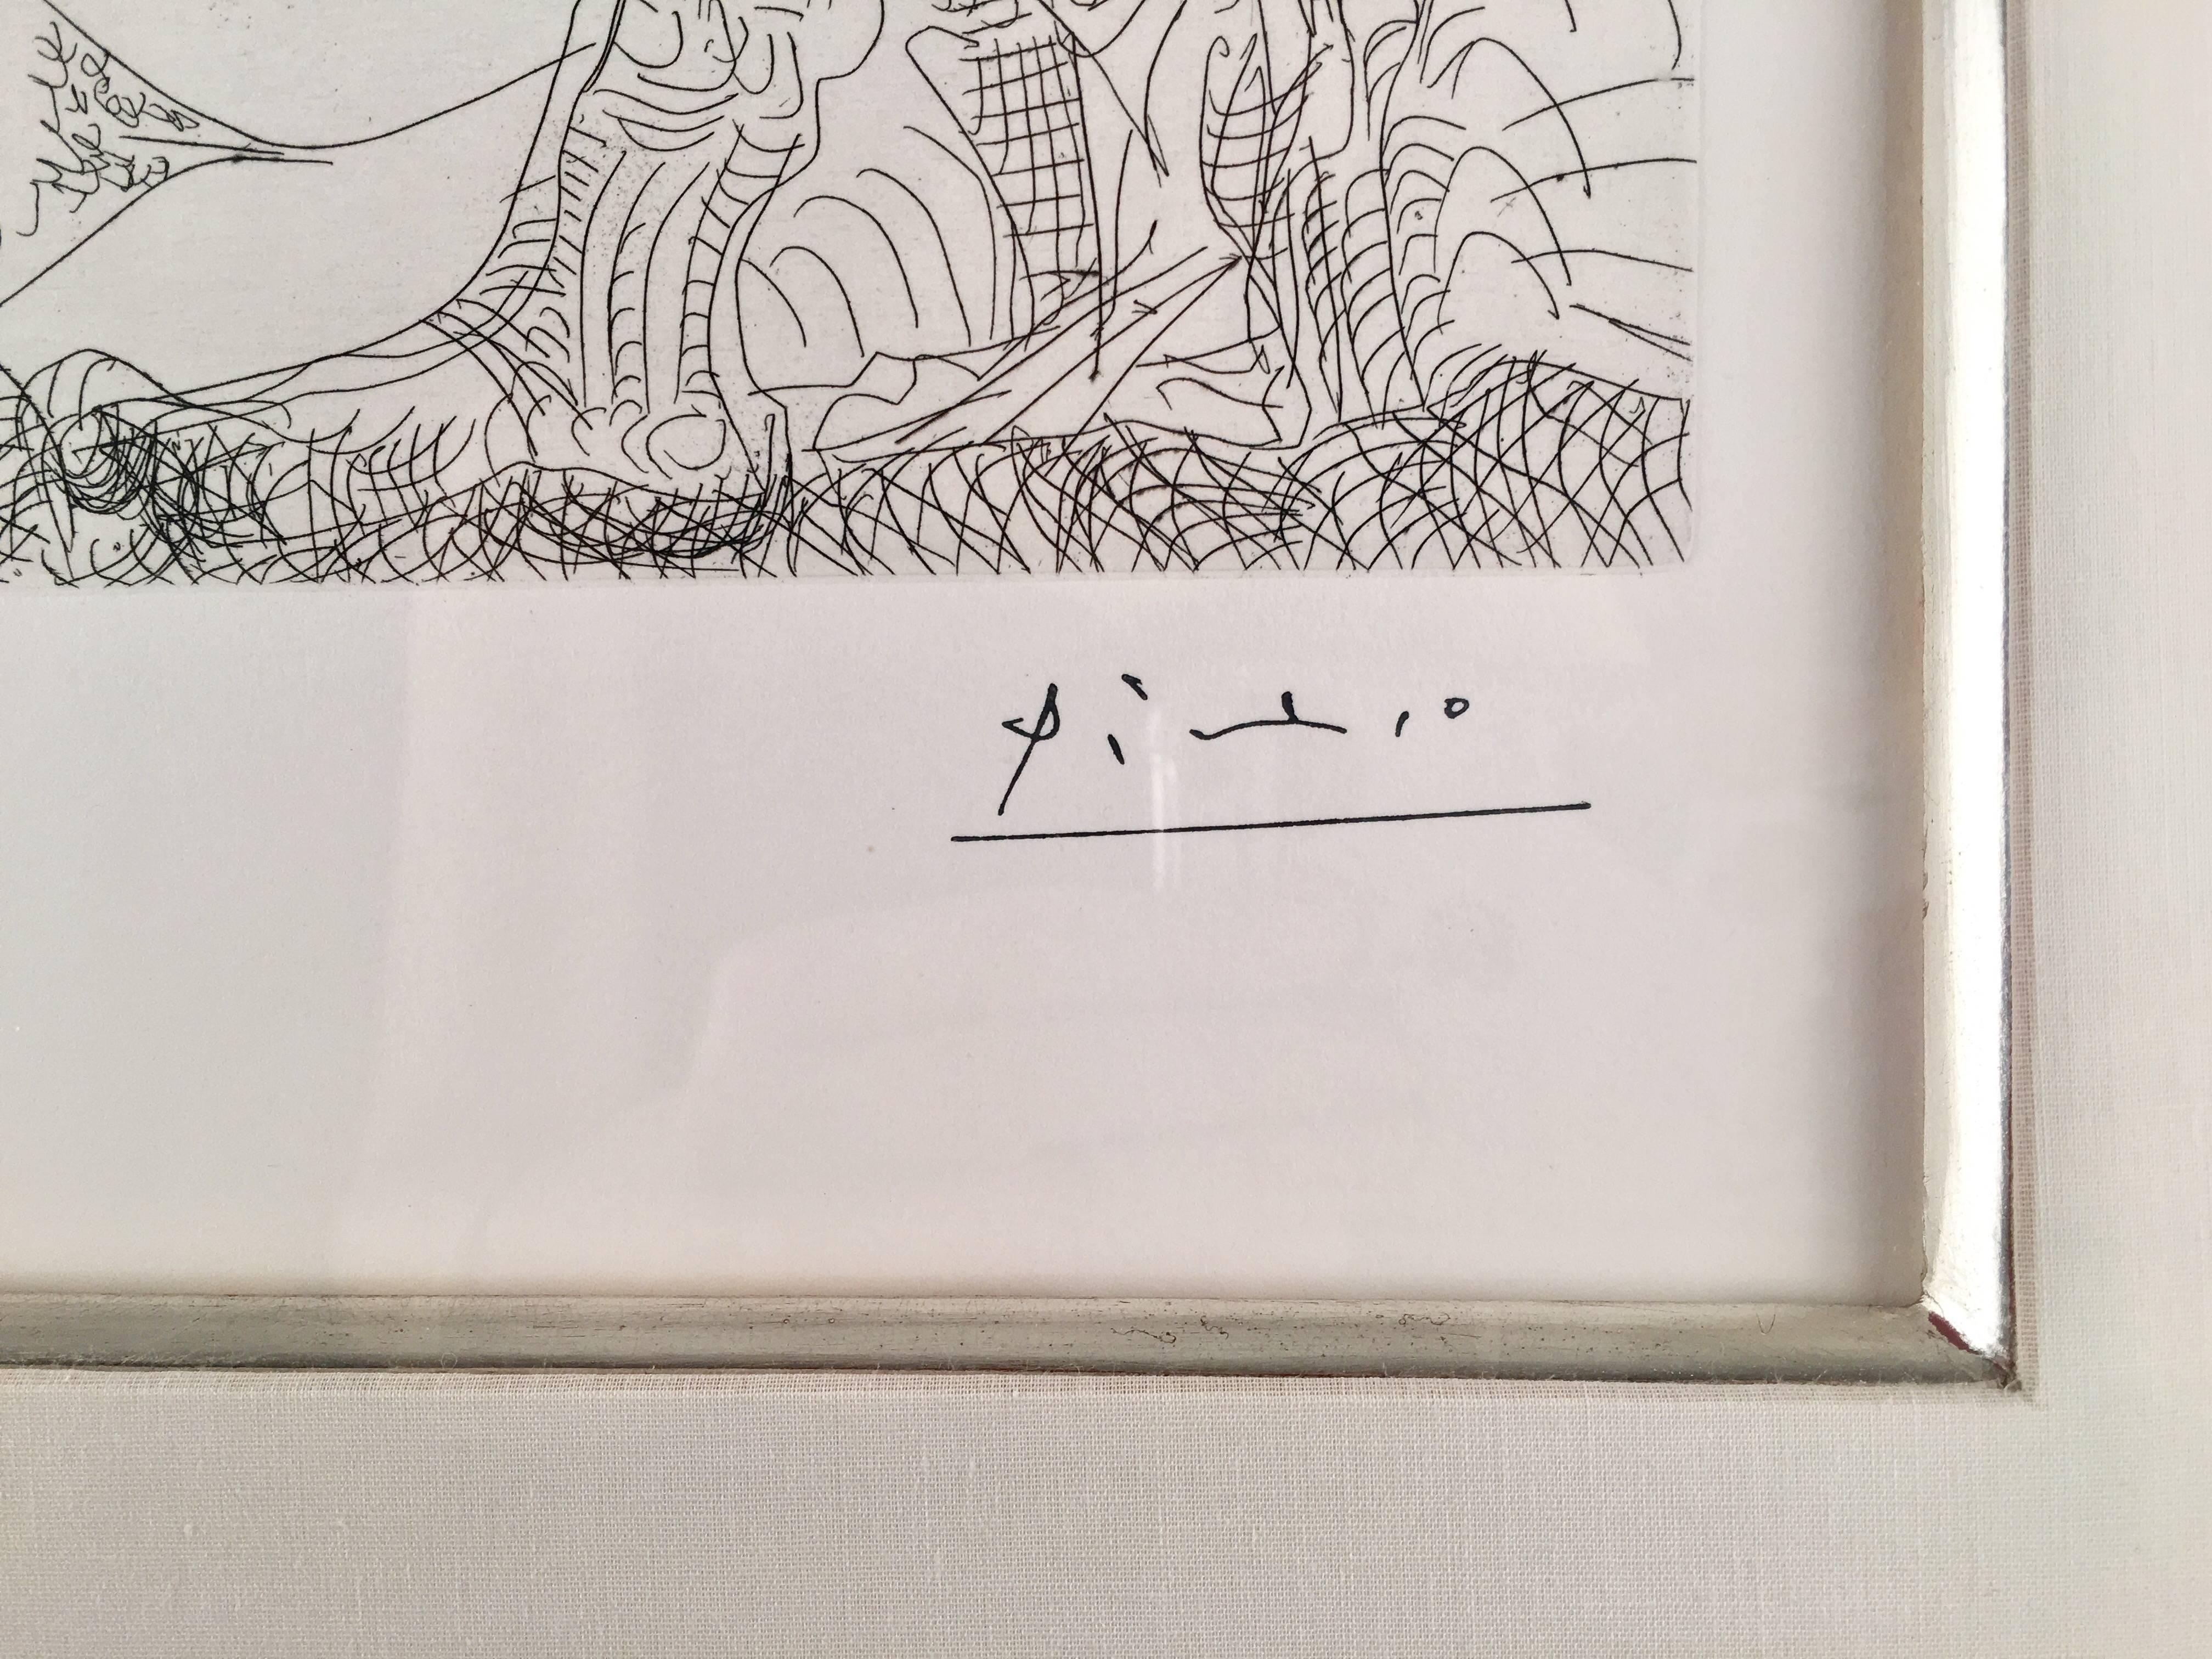 An original etching created by Pablo Picasso in 1966 .  It is stamp signed and numbered from the edition of 50.  This piece measures 8.8 x 12.8 inches and the framed dimensions are 19.75 x 22 inches.  Referenced as number 1426 in 